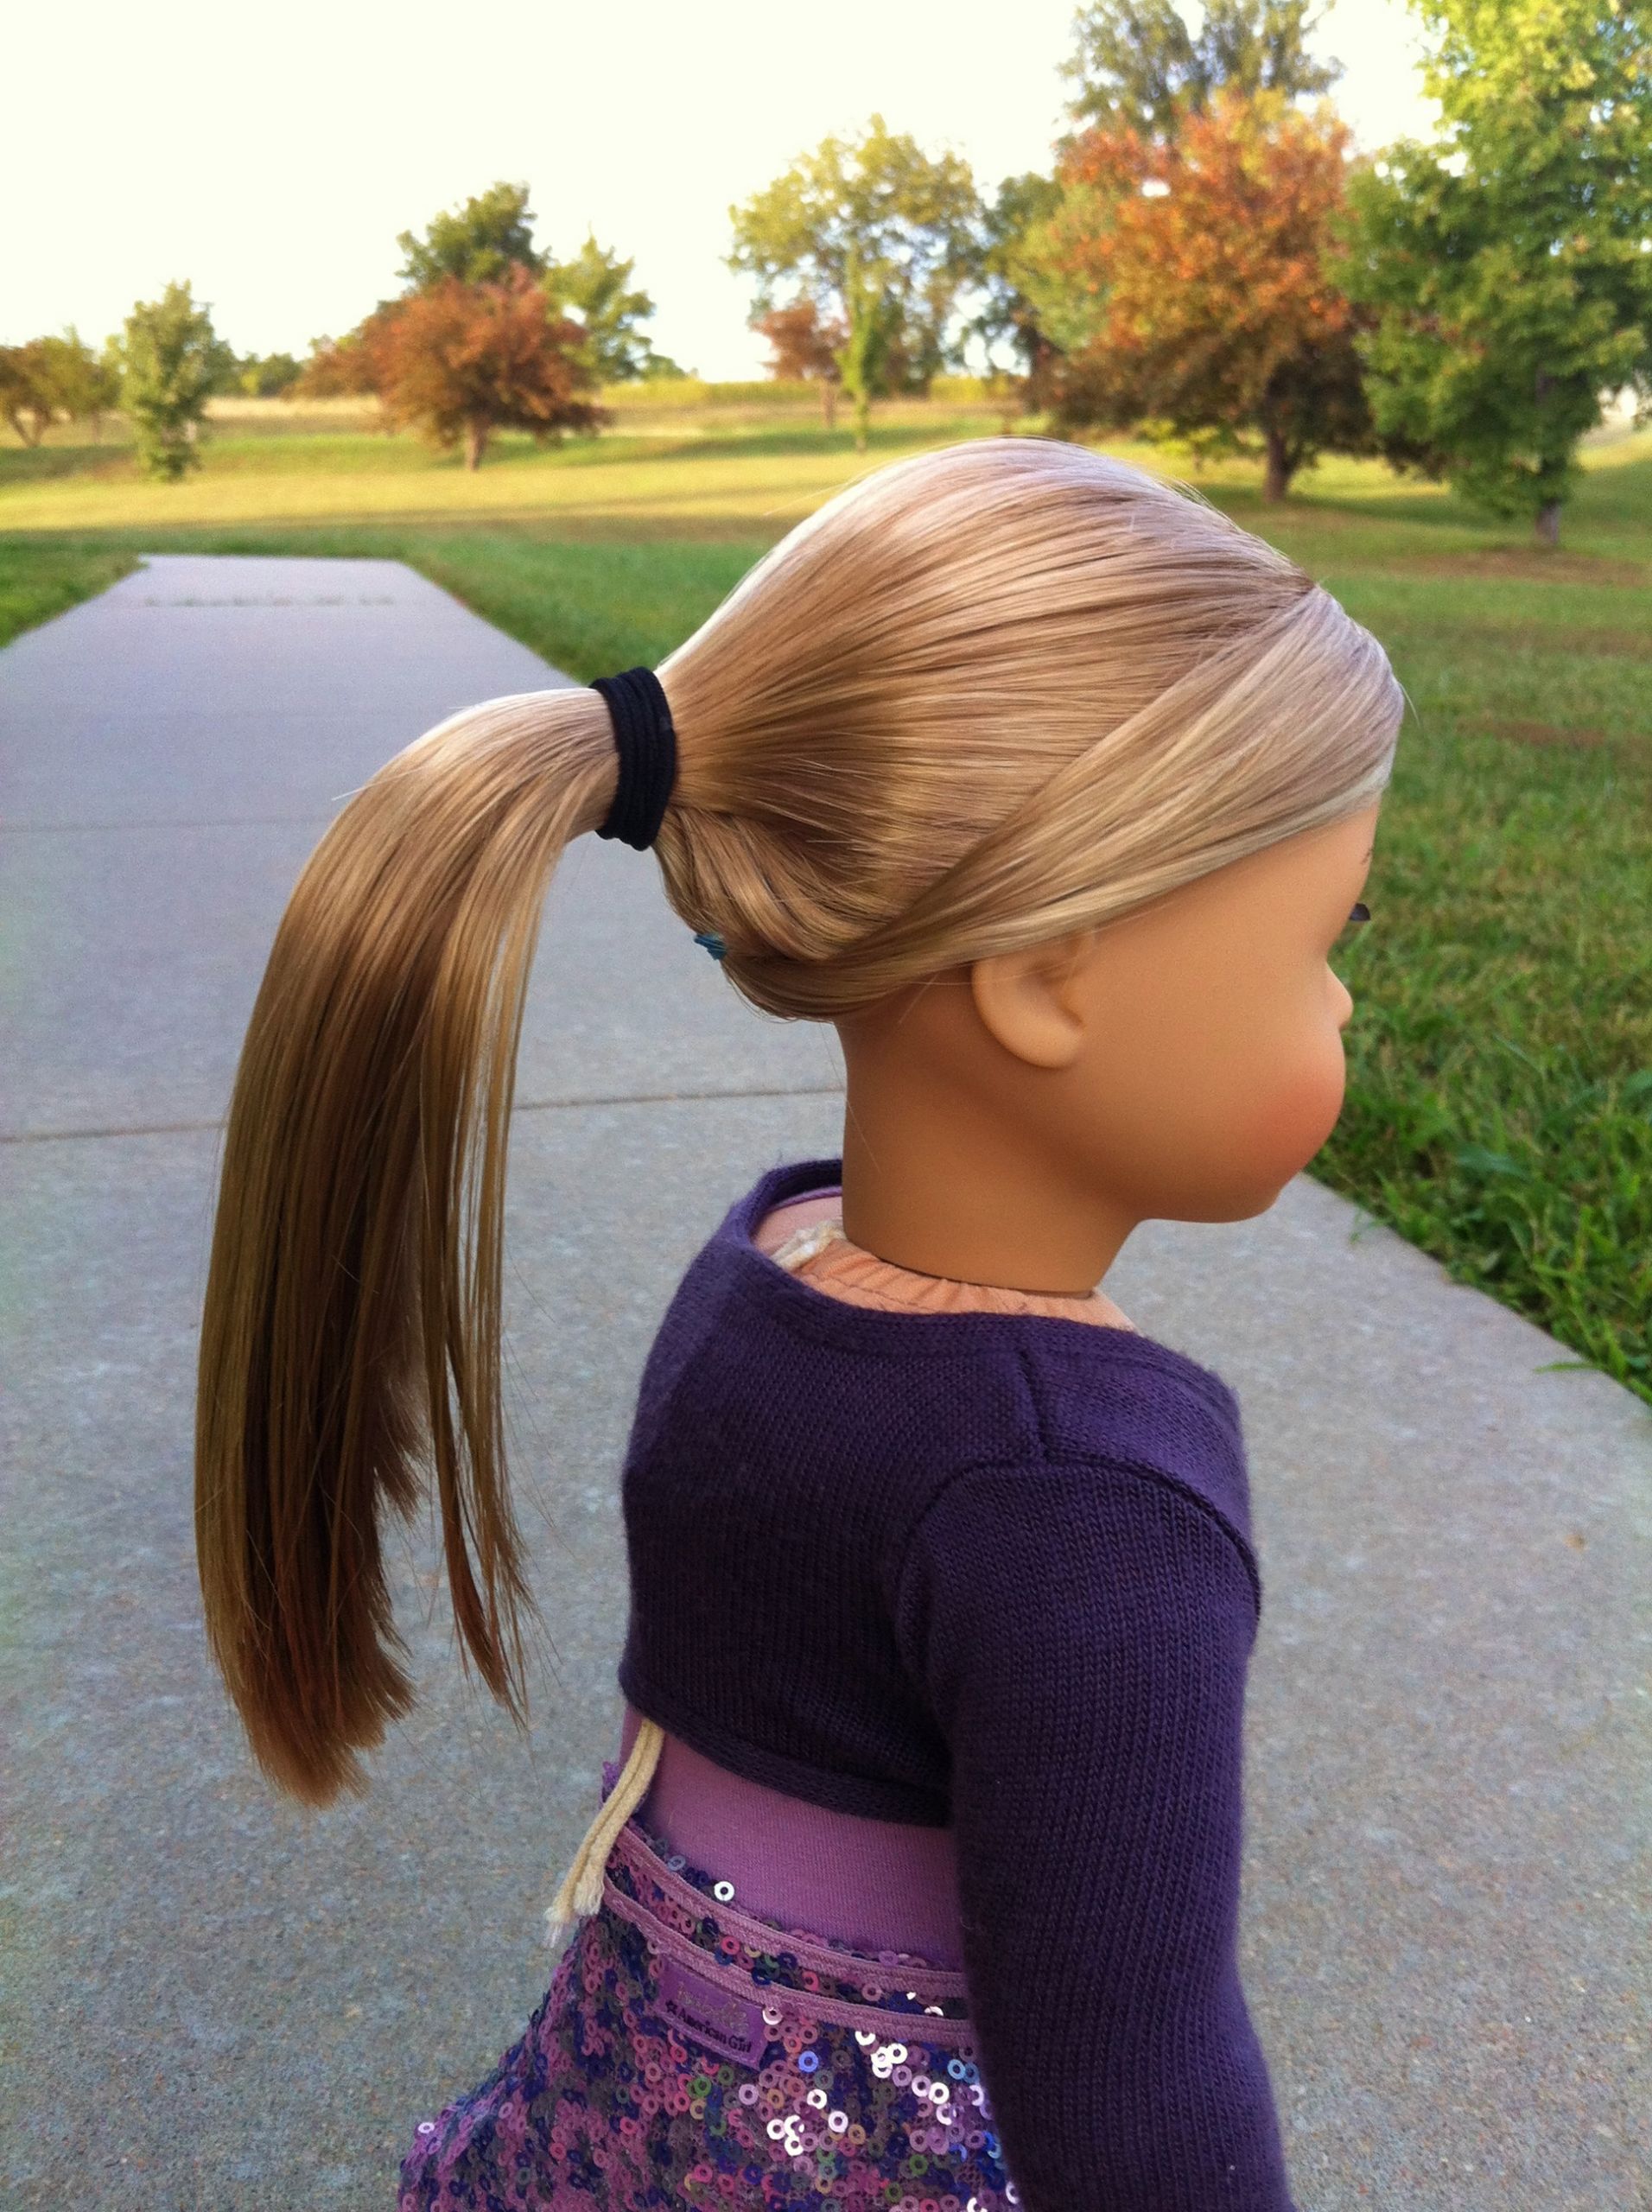 American Girl Doll Hairstyles
 Hairstyle Isabelle s bangs